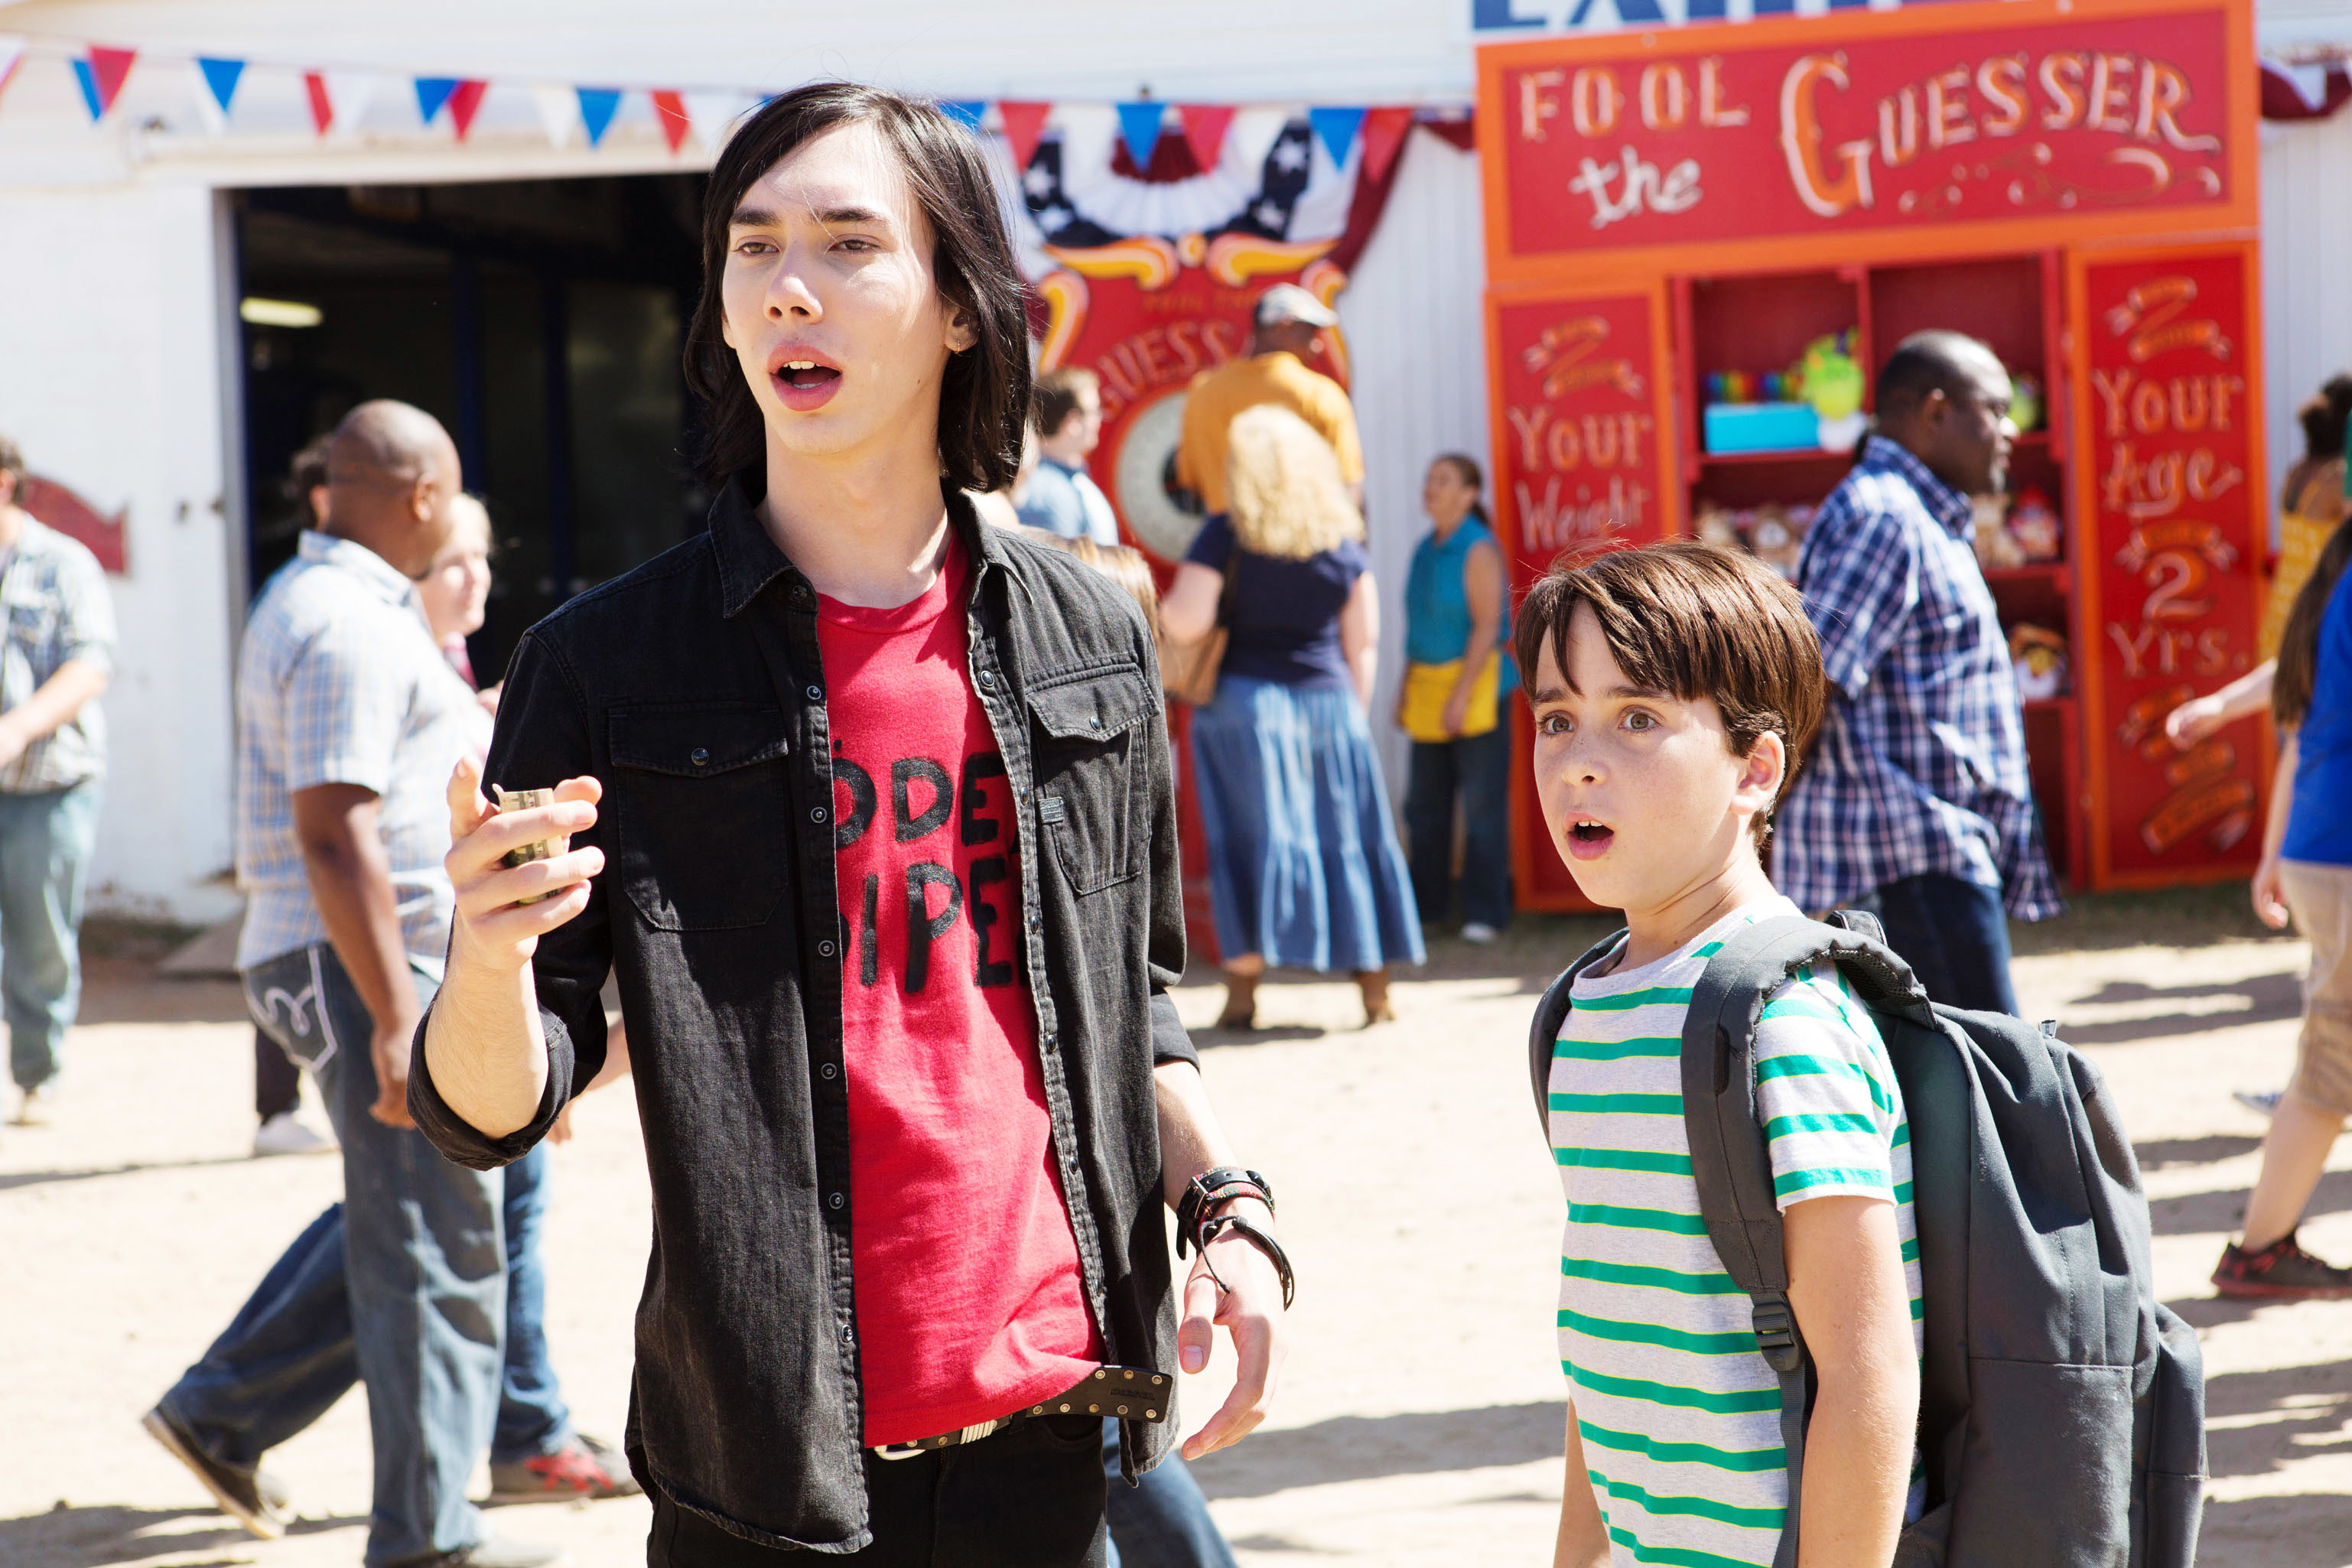 Two kids from &quot;Diary of a Wimpy Kid&quot; stand at a fairgrounds, one eating a hot dog, the other carrying a backpack